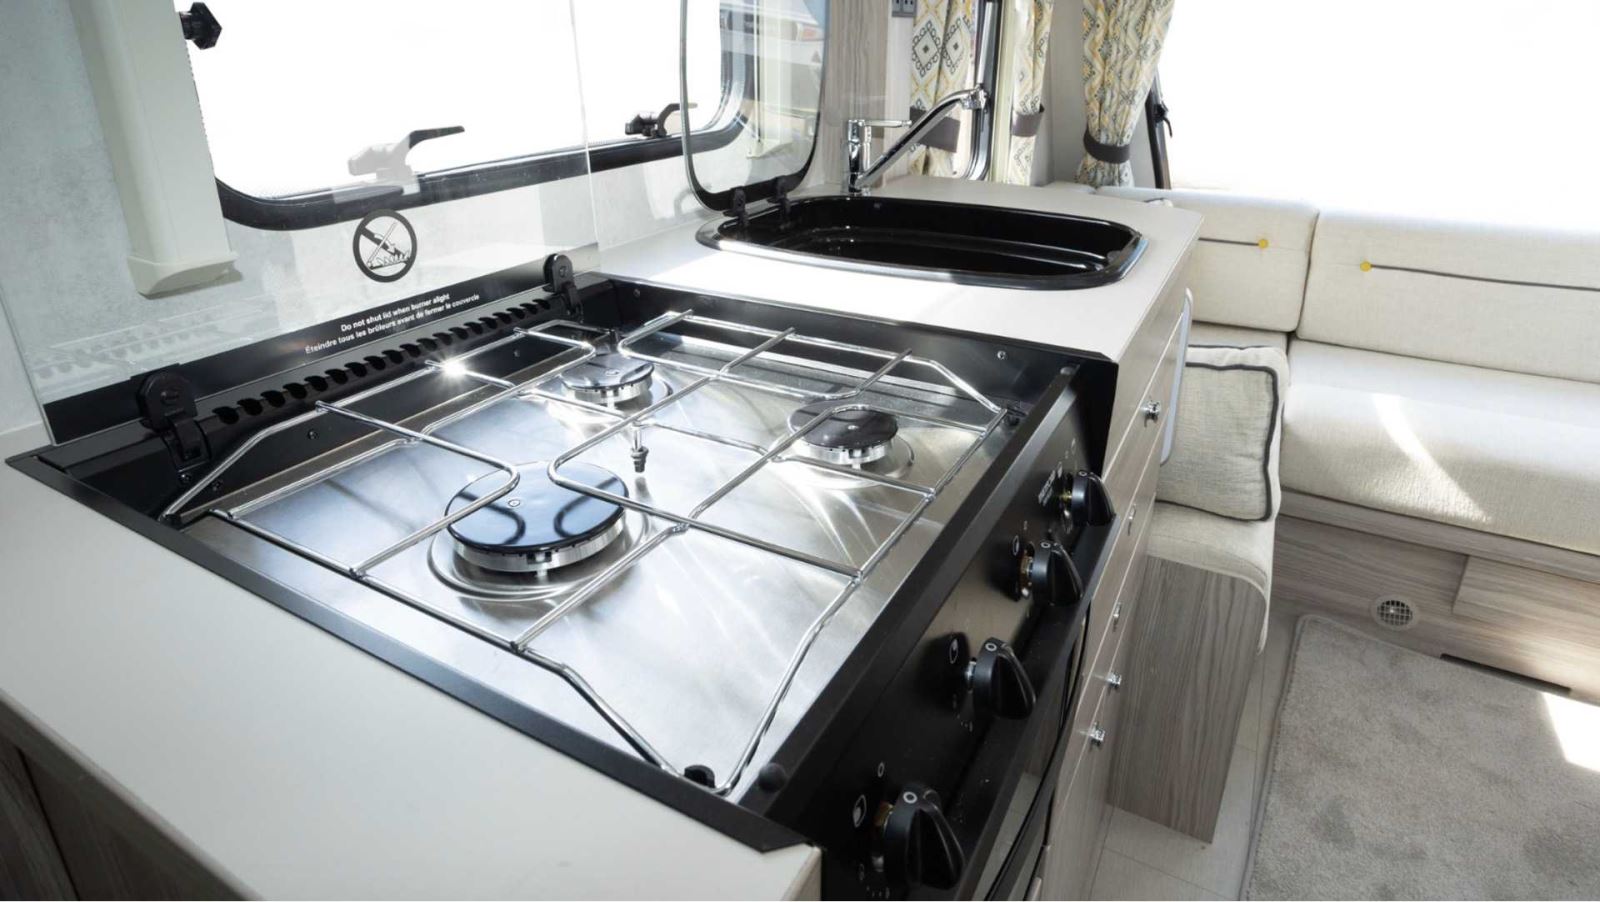 A look at the kitchen inside the Xplore 304 SE